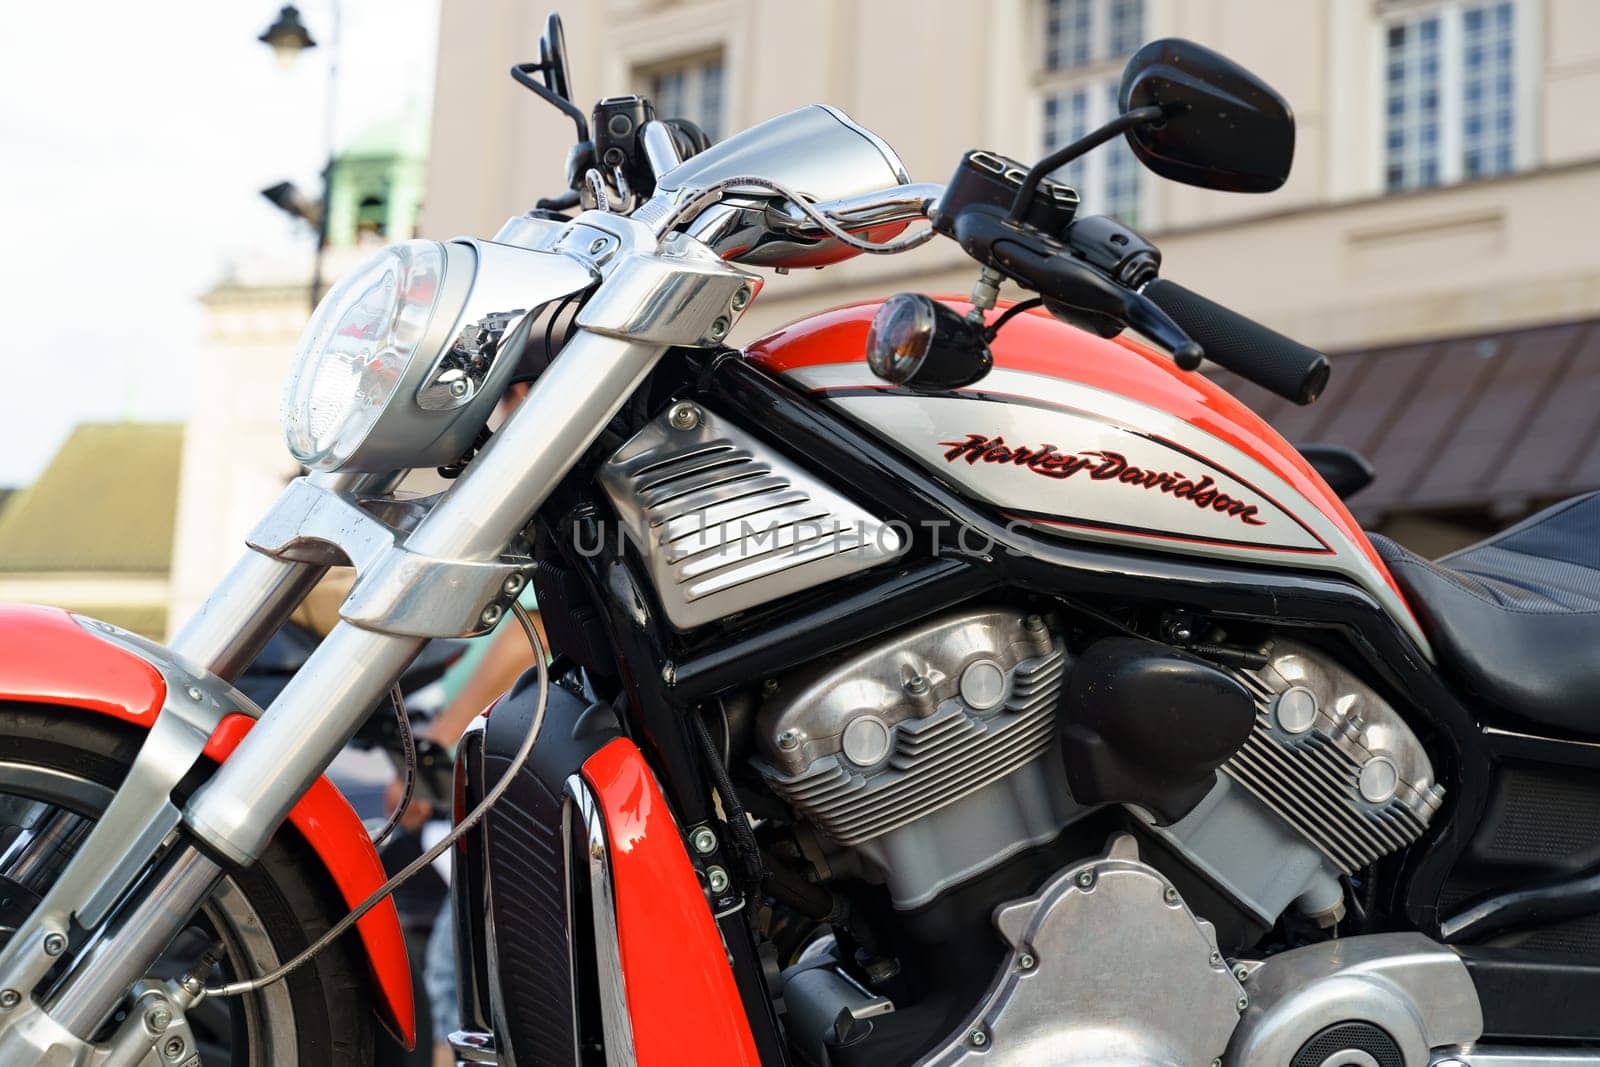 Warsaw, Poland - August 6, 2023: A Harley Davidson motorcycle is parked in a parking lot, side view. Close-up